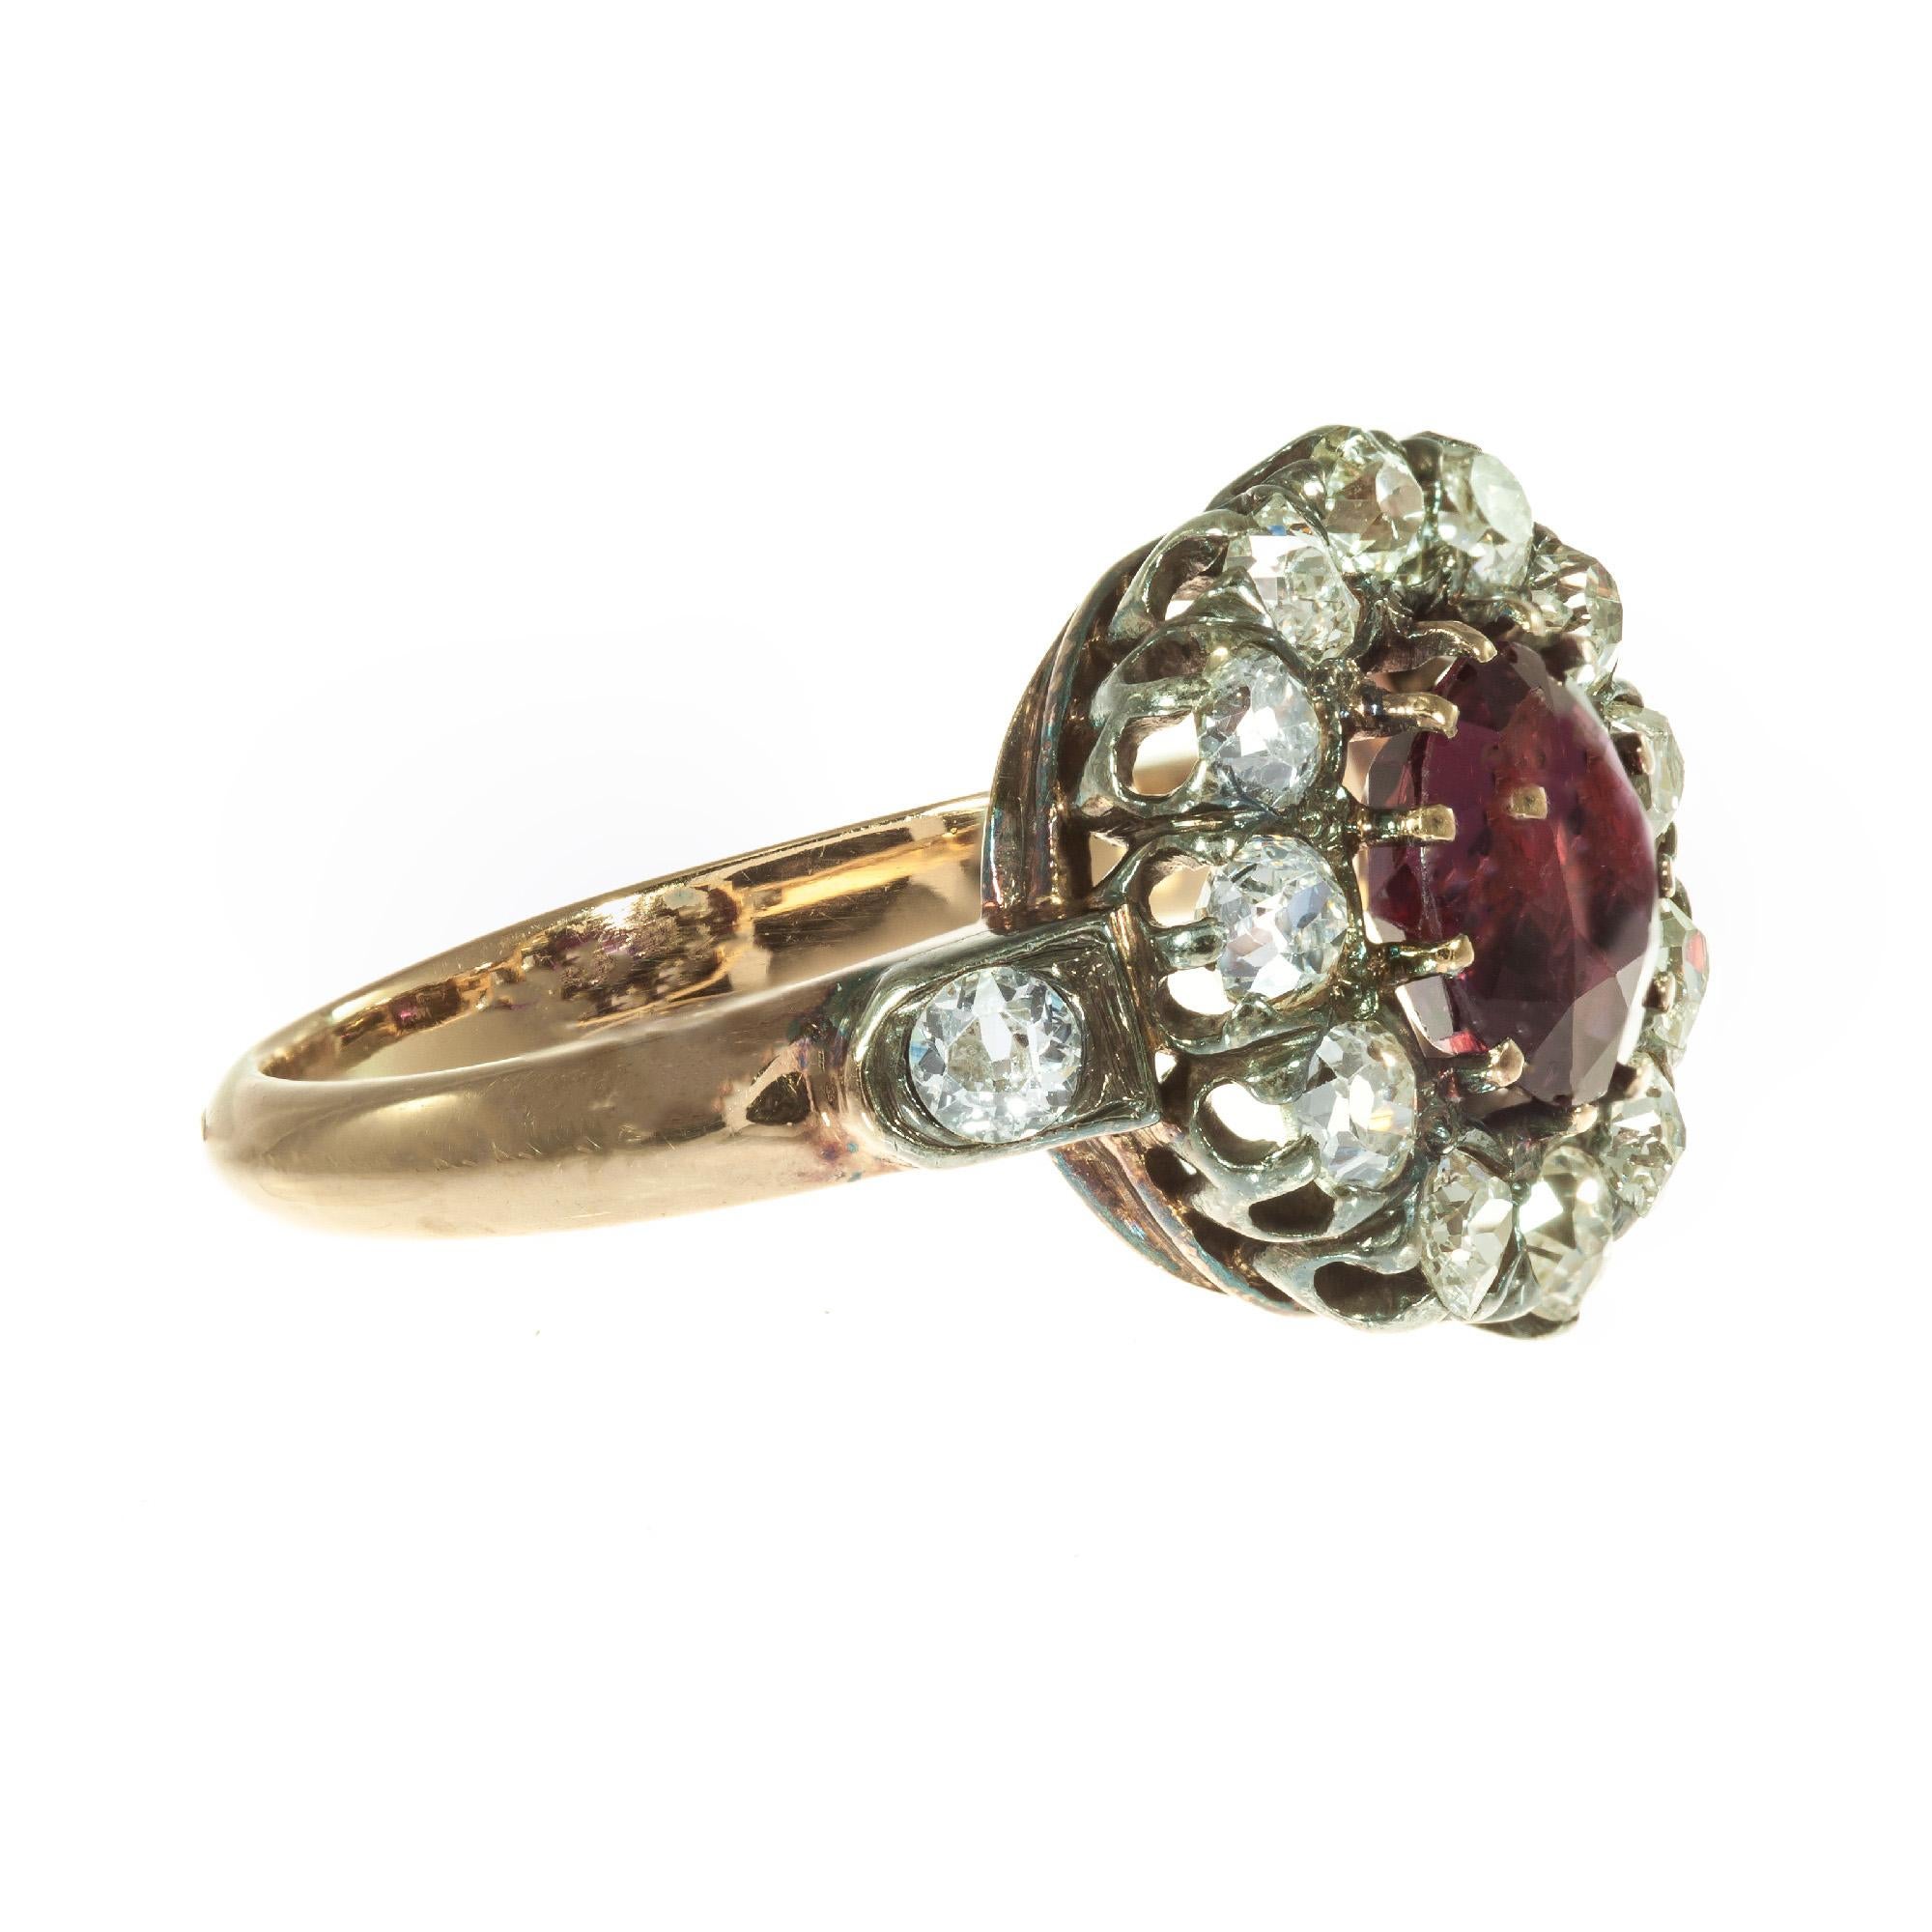 Original red ruby diamond halo engagement ring. Circa 1880-1889 with old mine halo of diamonds surrounding a round brilliant cut ruby. Handmade 14k rose gold setting. 

1 round brilliant cut red MI ruby, Approximate .95ct GIA Certificate #